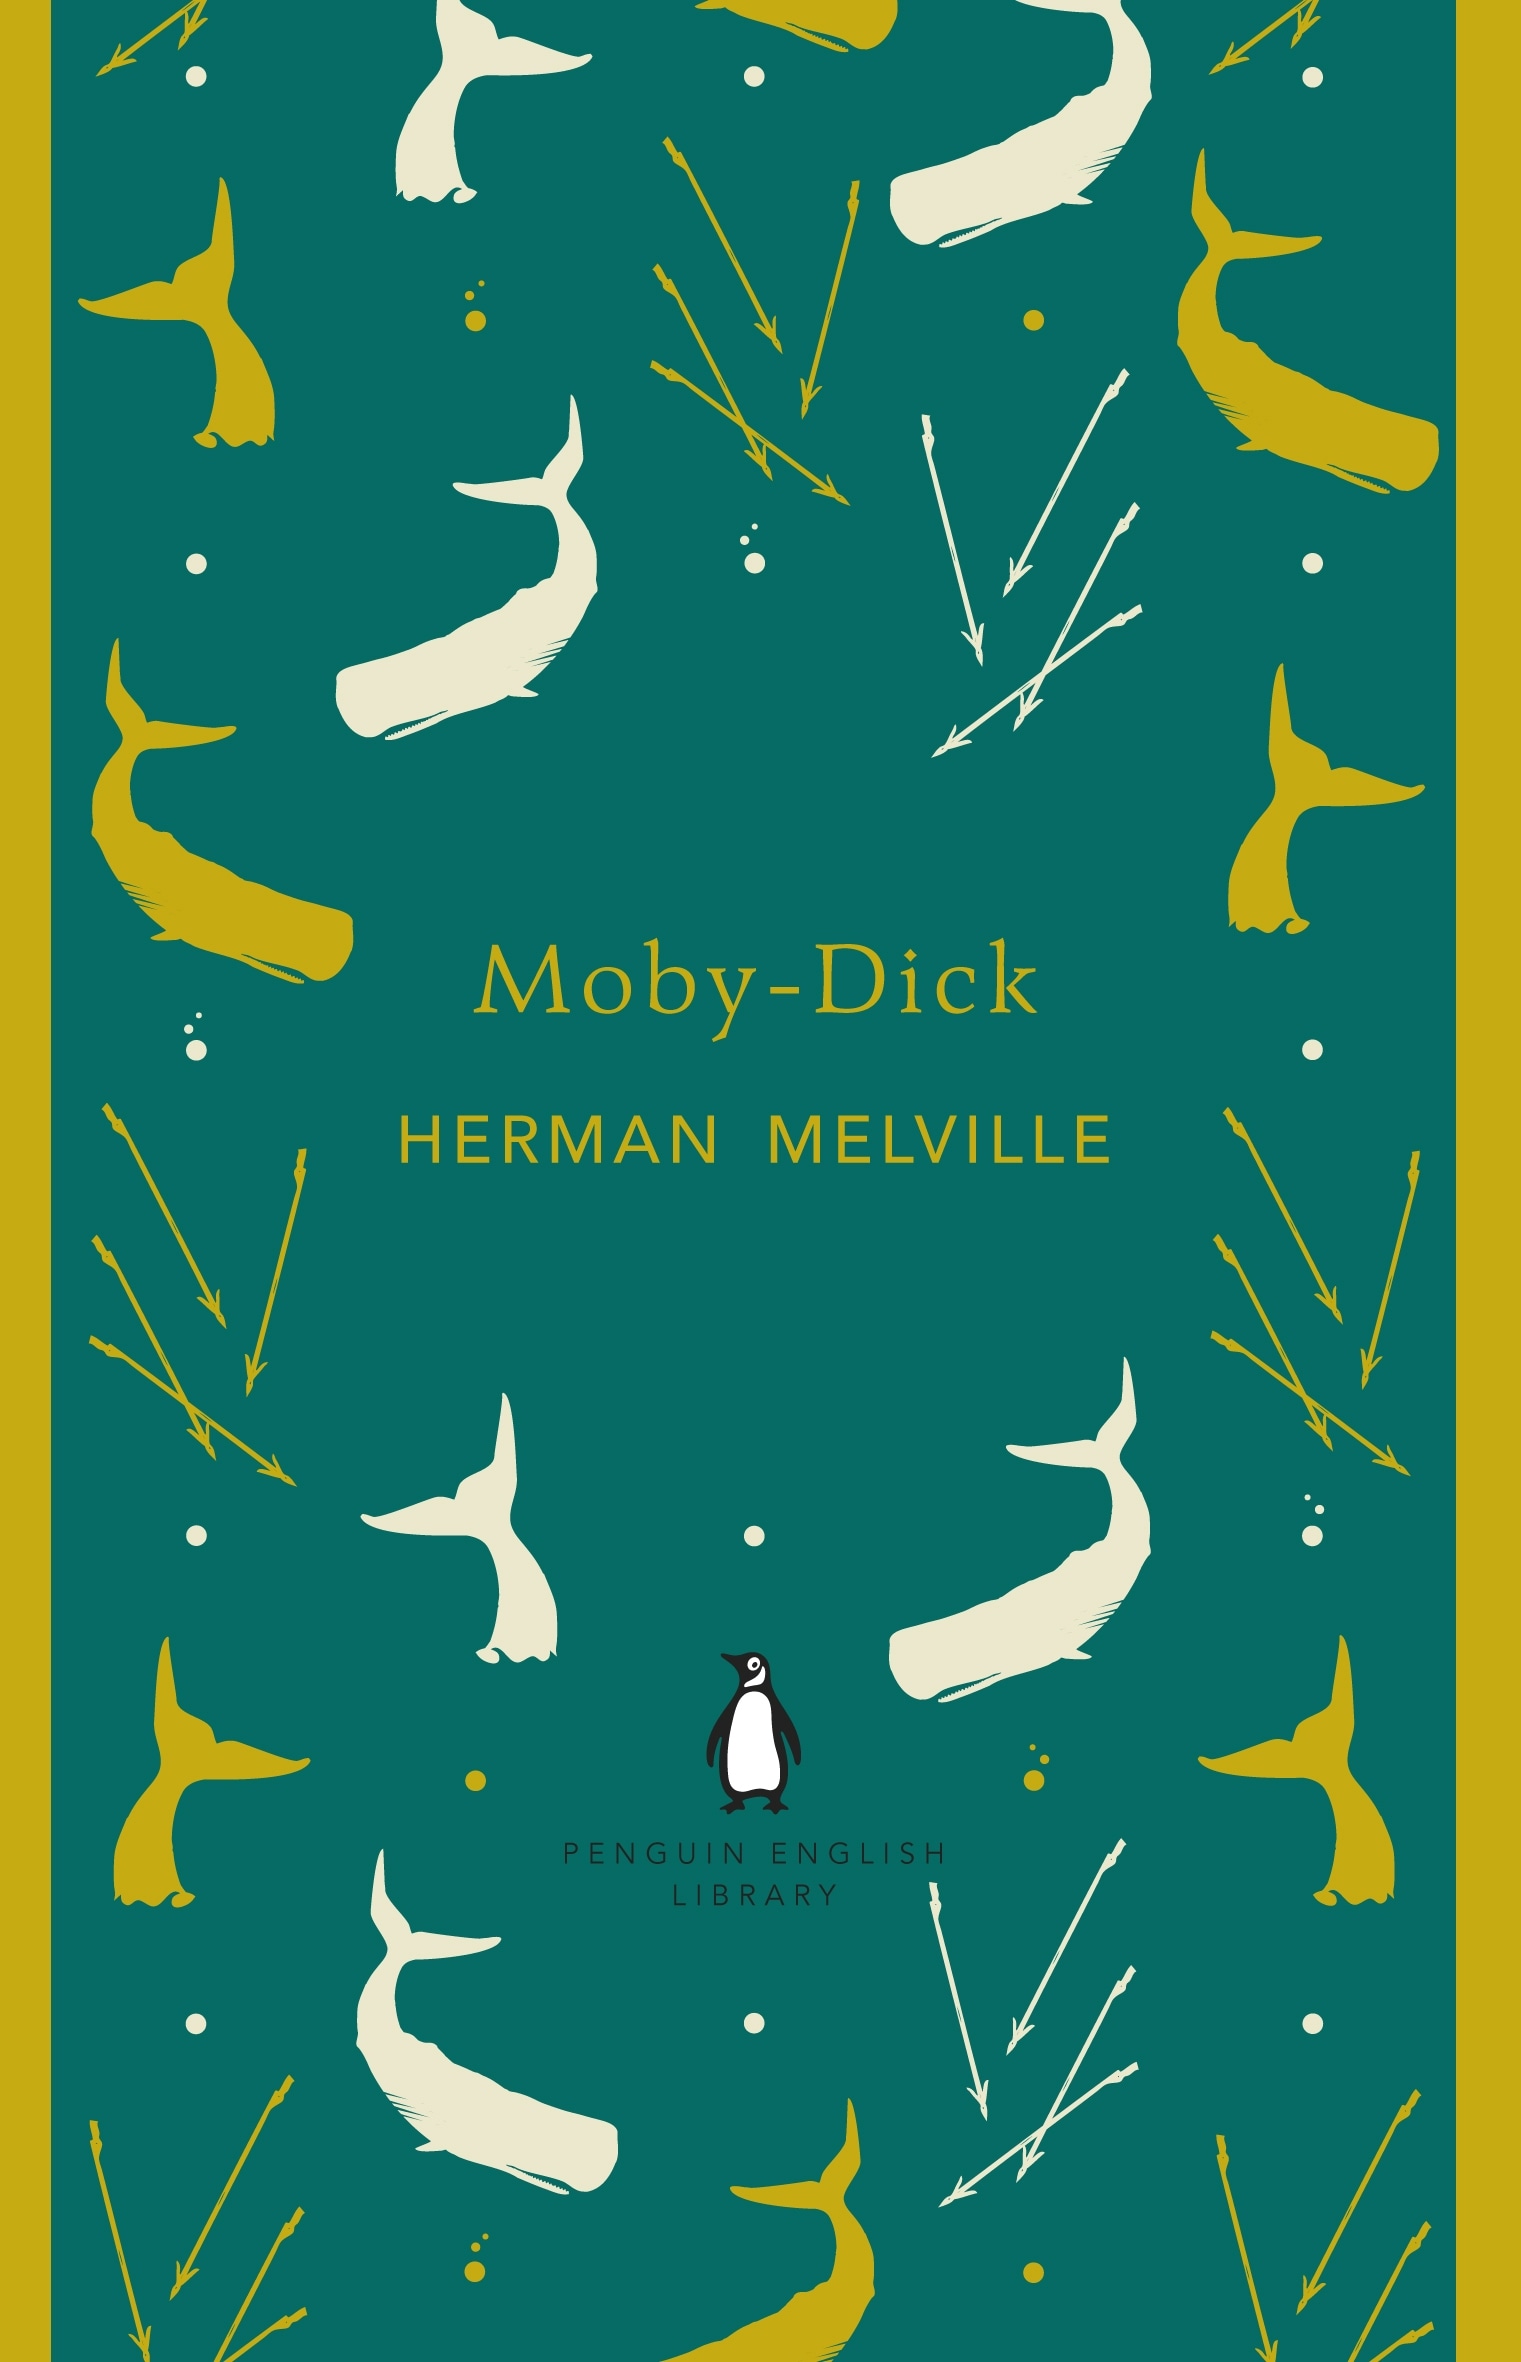 Book “Moby-Dick” by Herman Melville — April 26, 2012